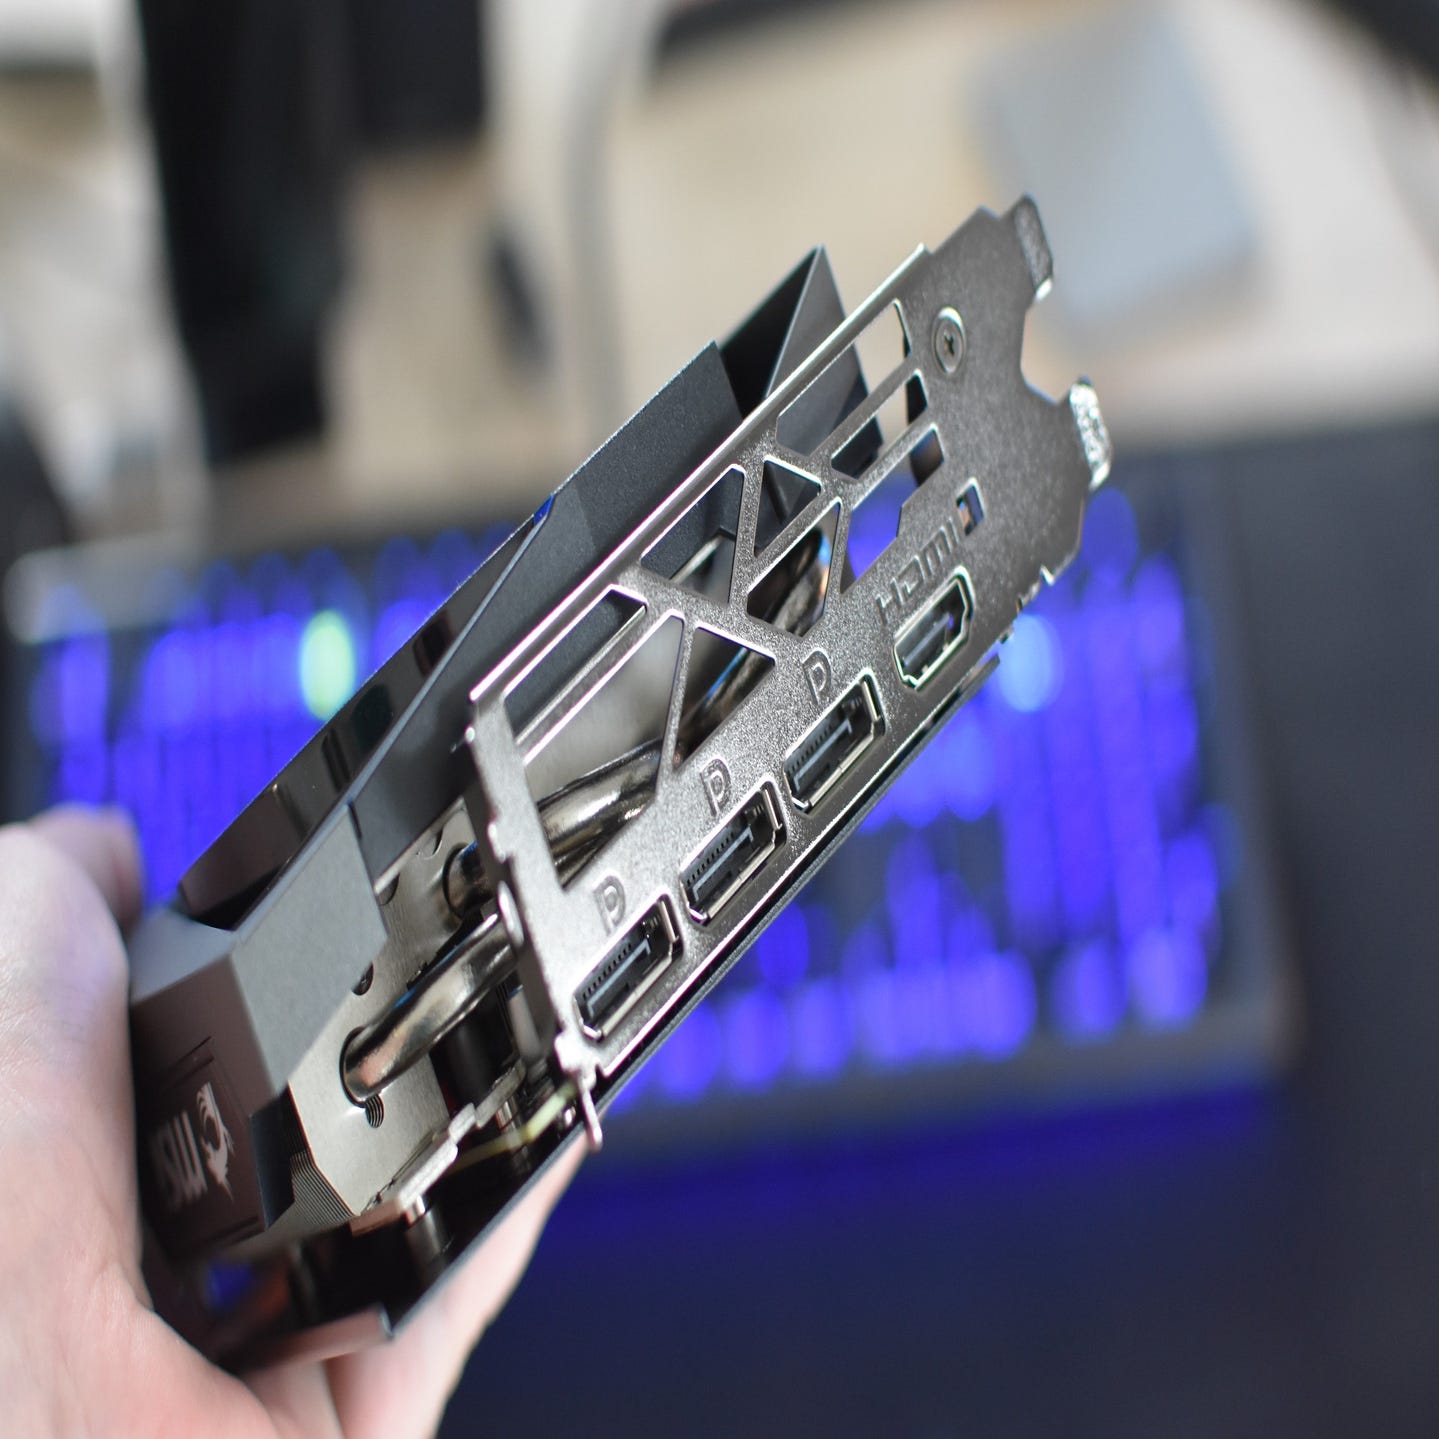 Nvidia GeForce RTX 4060 Ti review: the big middle of graphics cards